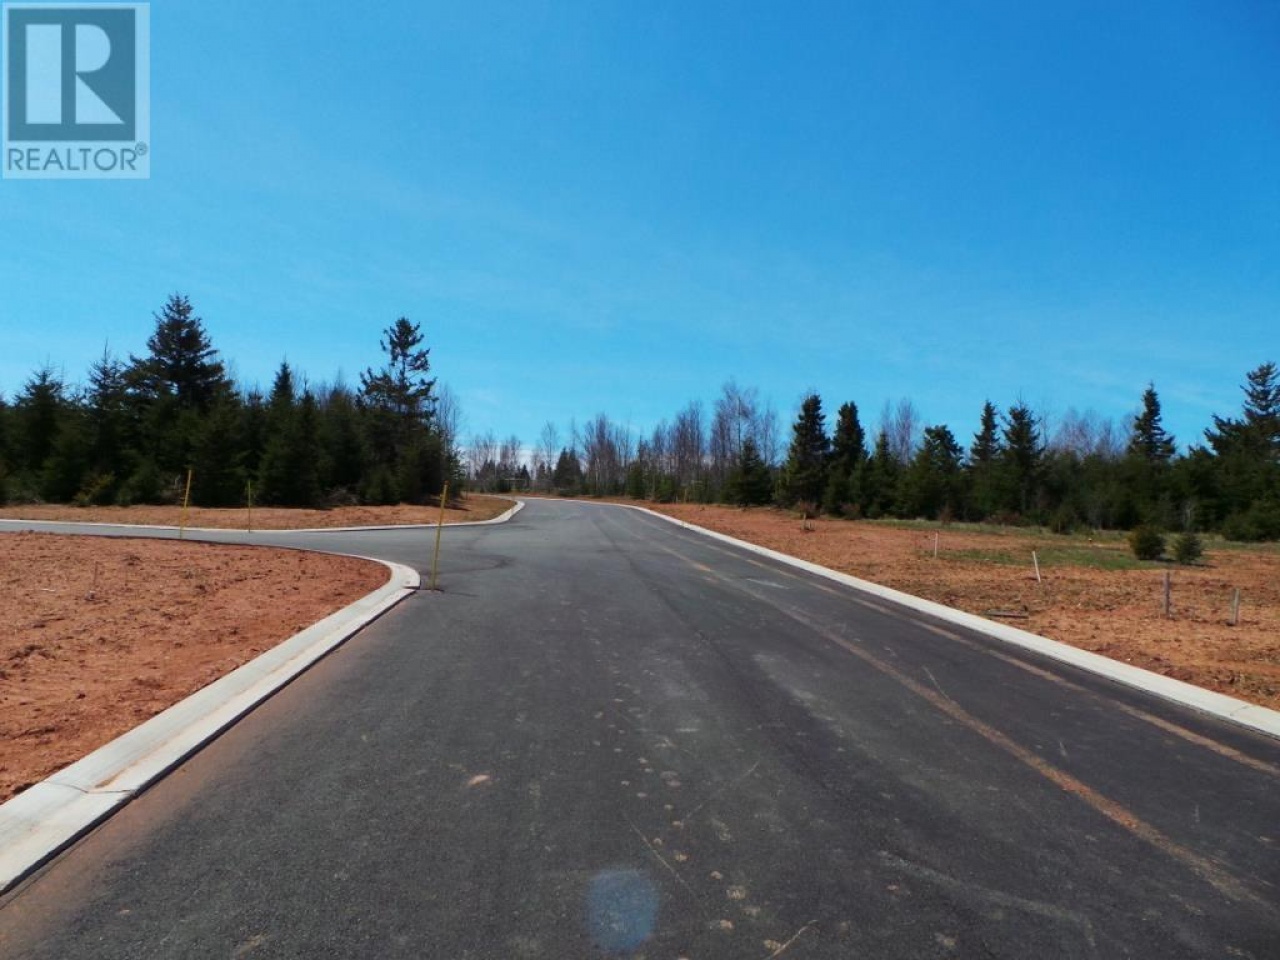 Lot 20-2 Waterview HeightsLot 20-2 Waterview Heights, Summerside, Prince Edward Island C1N6H5, ,Vacant Land,For Sale,Lot 20-2 Waterview Heights,202111405